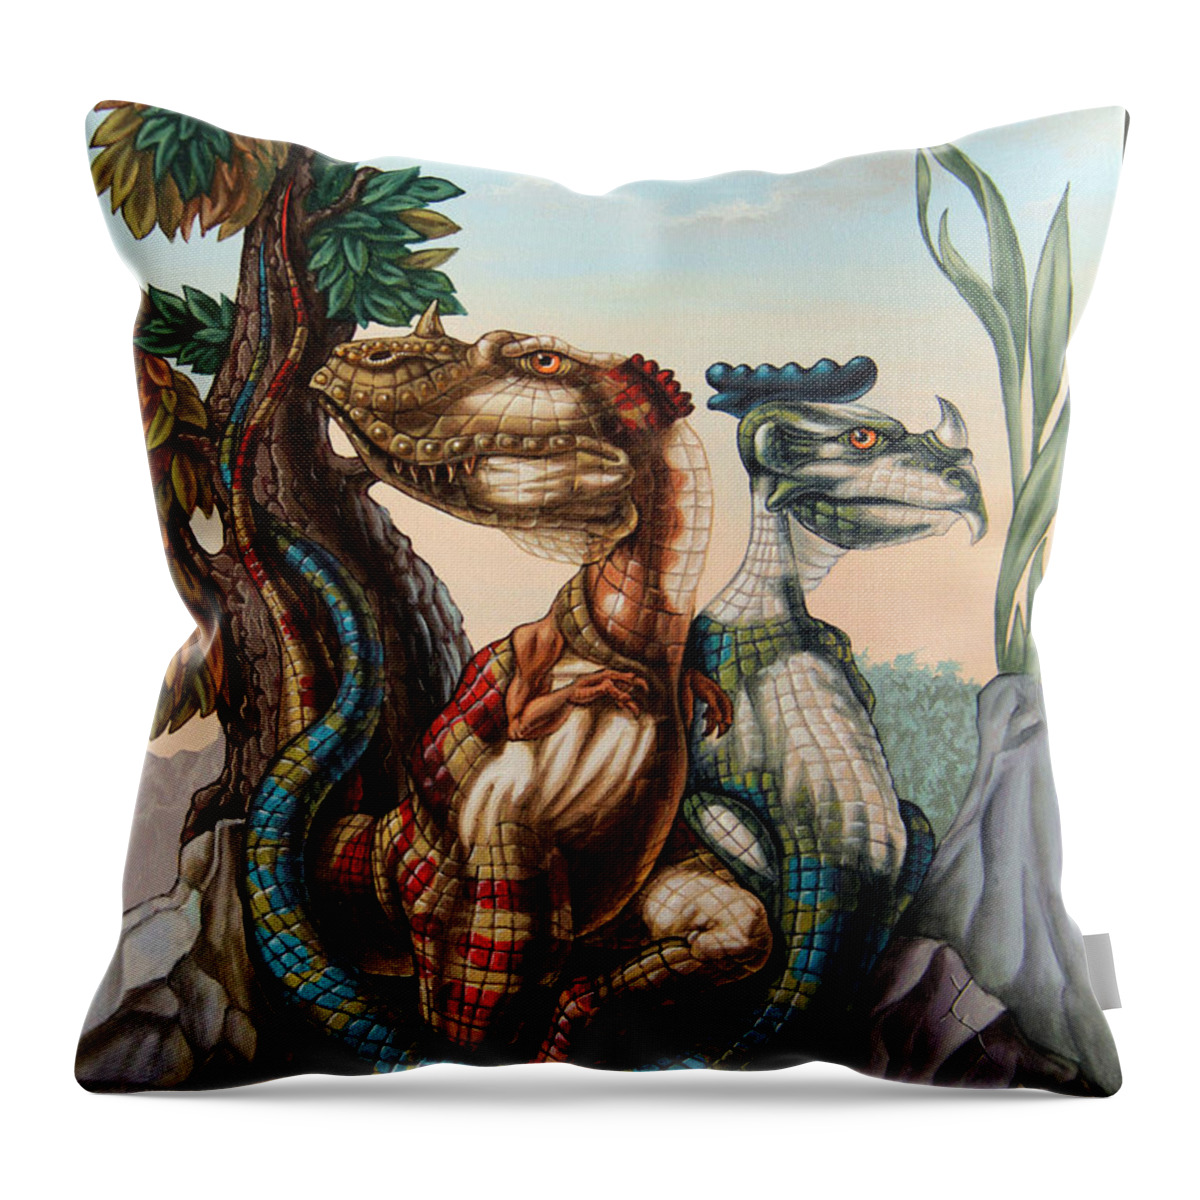 Lost World Throw Pillow featuring the painting The Lost World by Sir Arthur Conan Doyle by Victor Molev